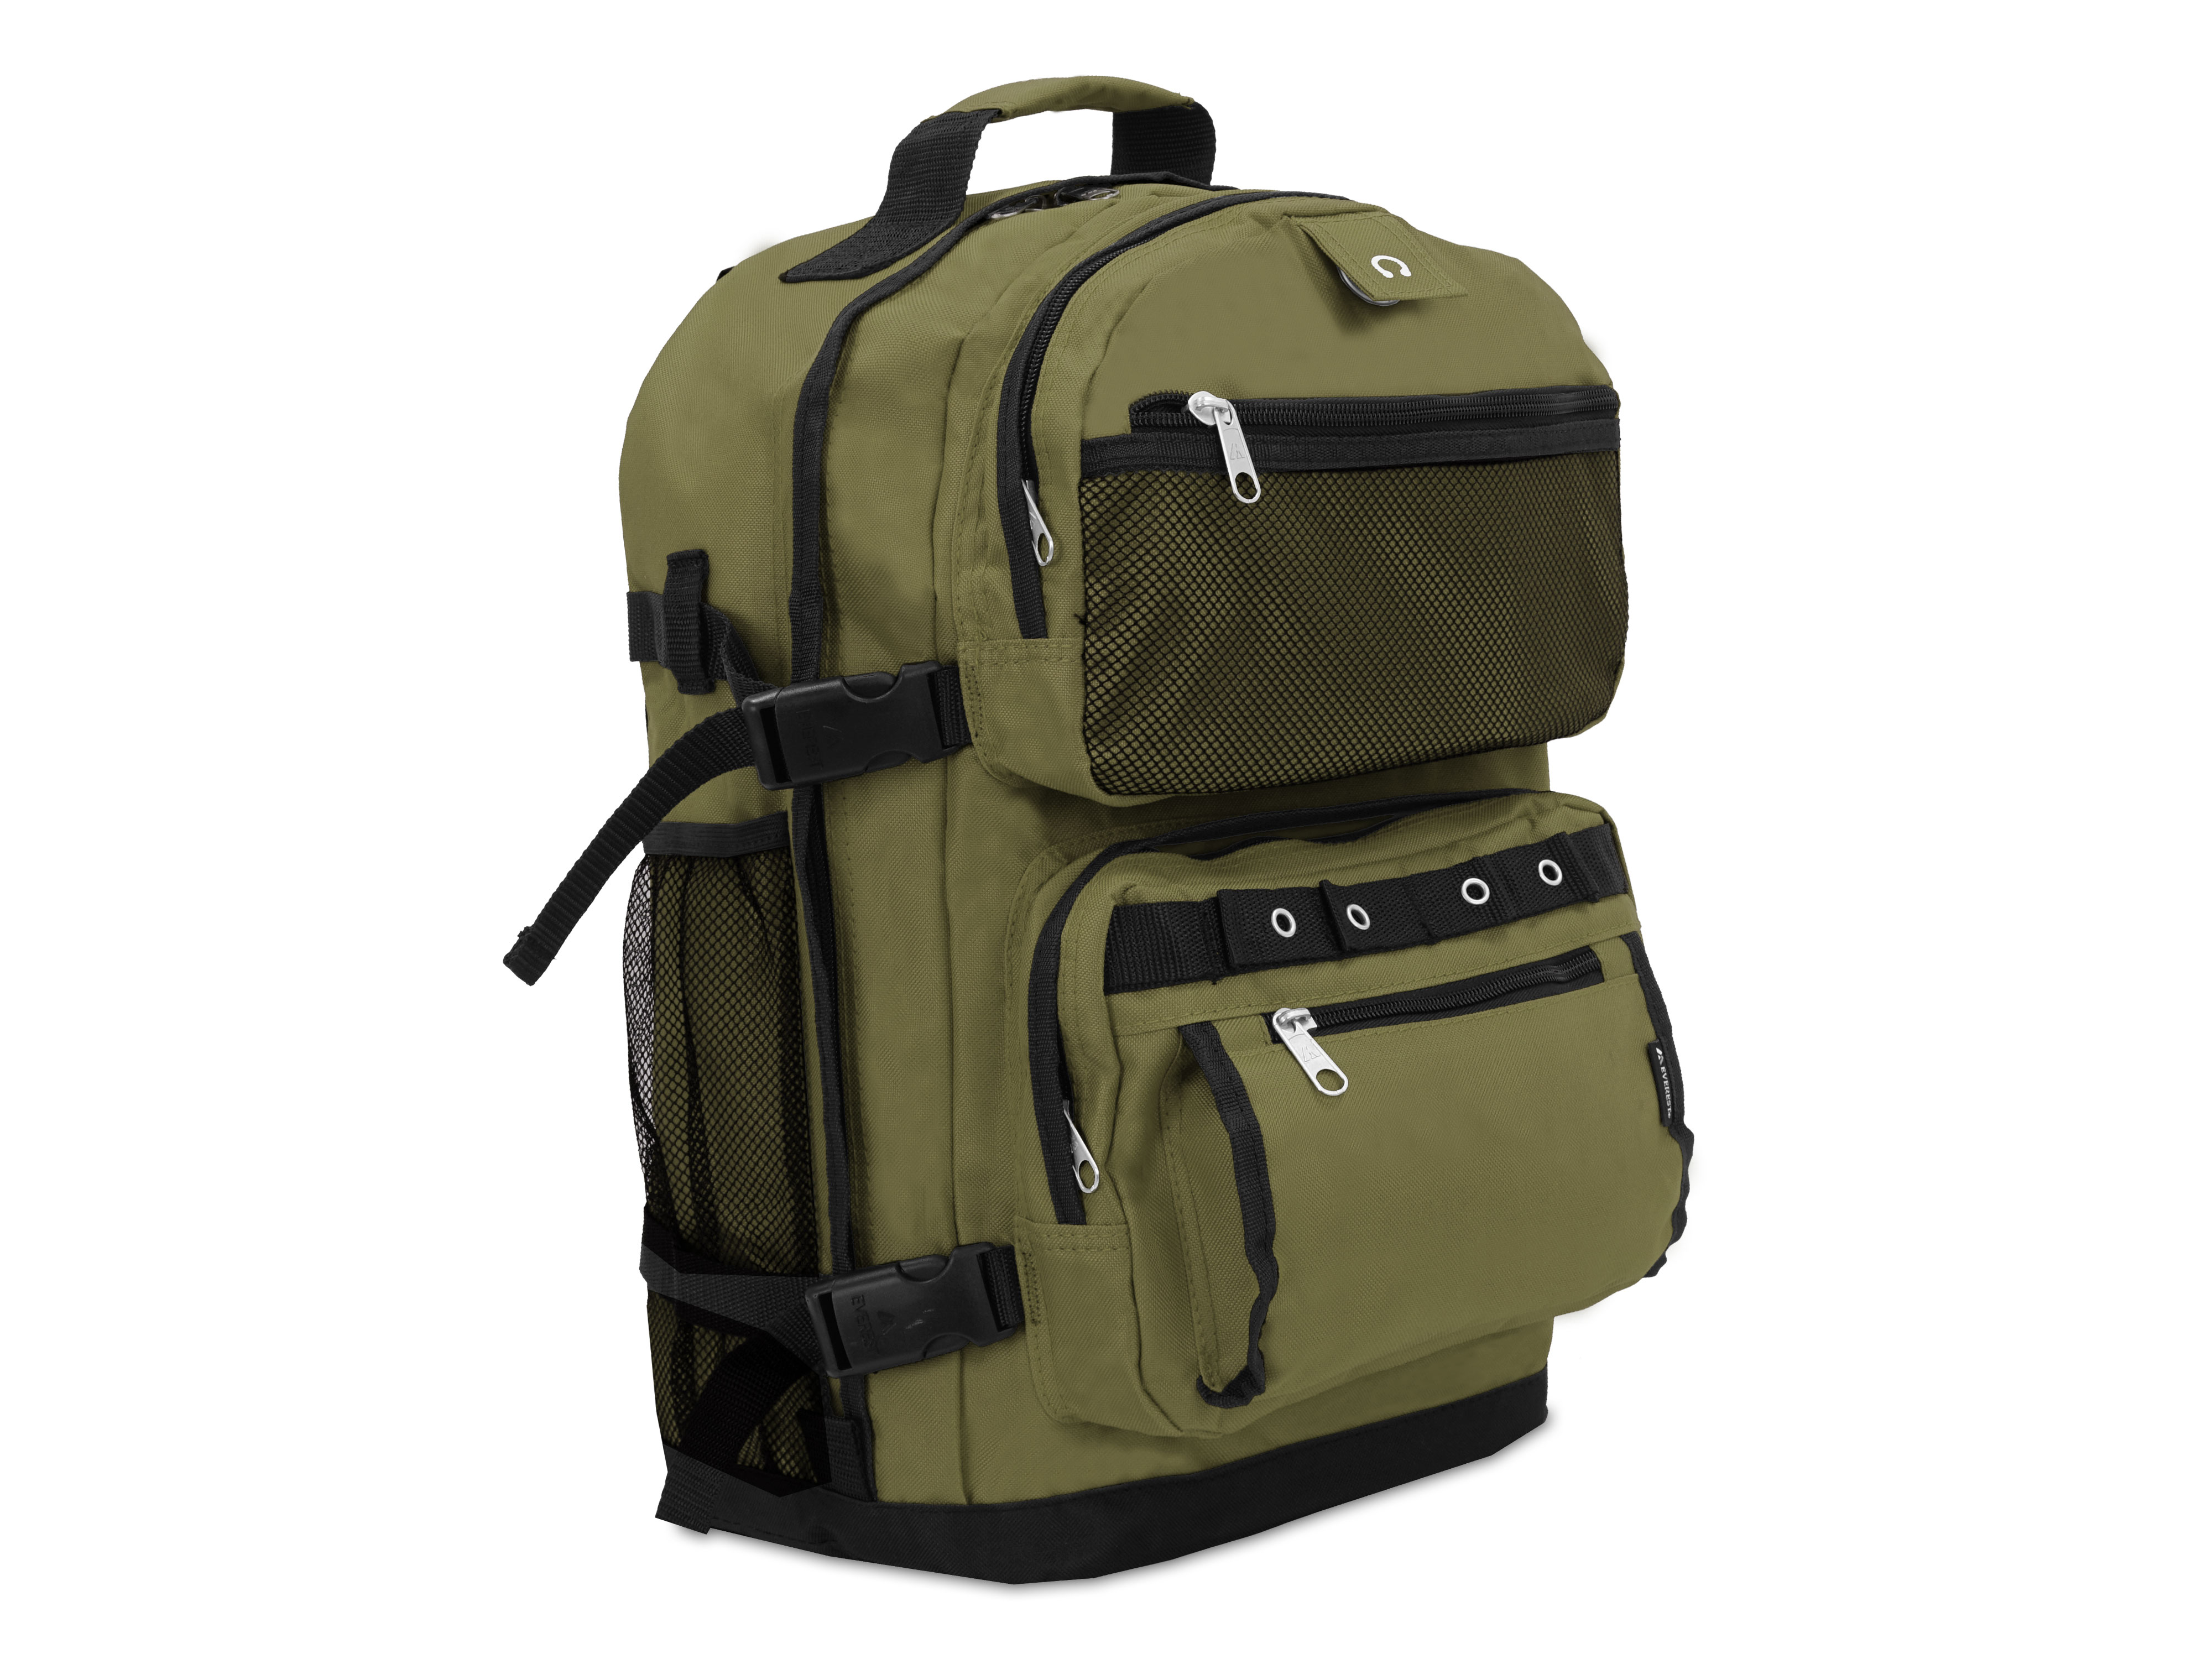 Everest 20" Oversized Deluxe Backpack, Olive All Ages, Unisex 3045R-OLI/BK, Carrier and Shoulder Book Bag for School, Work, Sports, and Travel - image 2 of 5